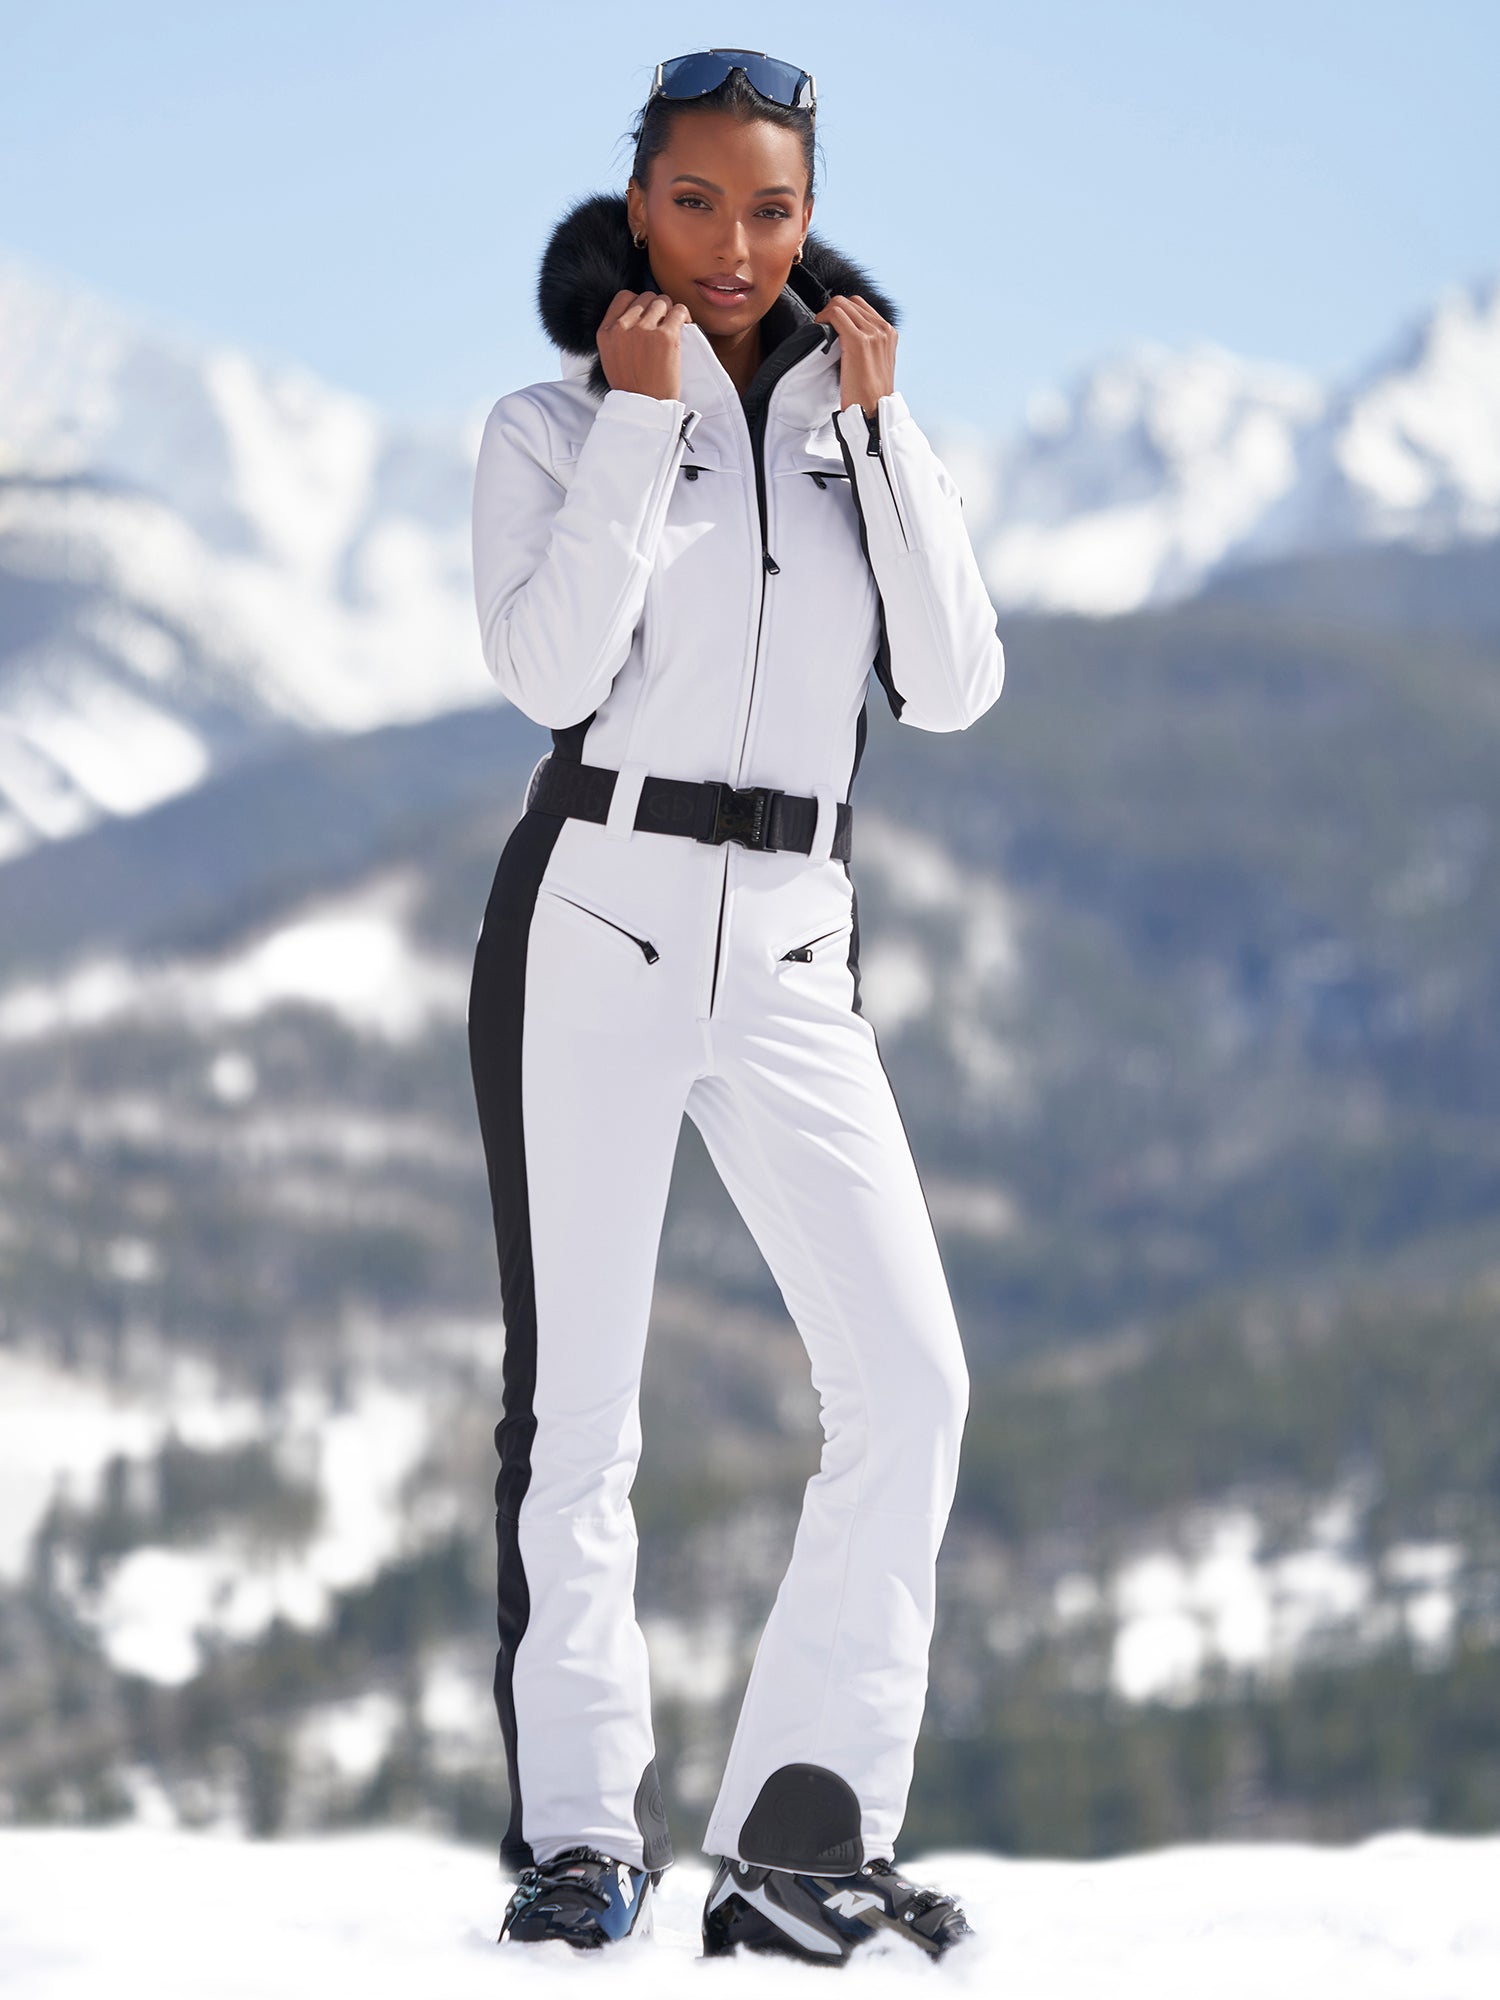 womens ski suits - Gorsuch  Skiing outfit, Womens ski outfits